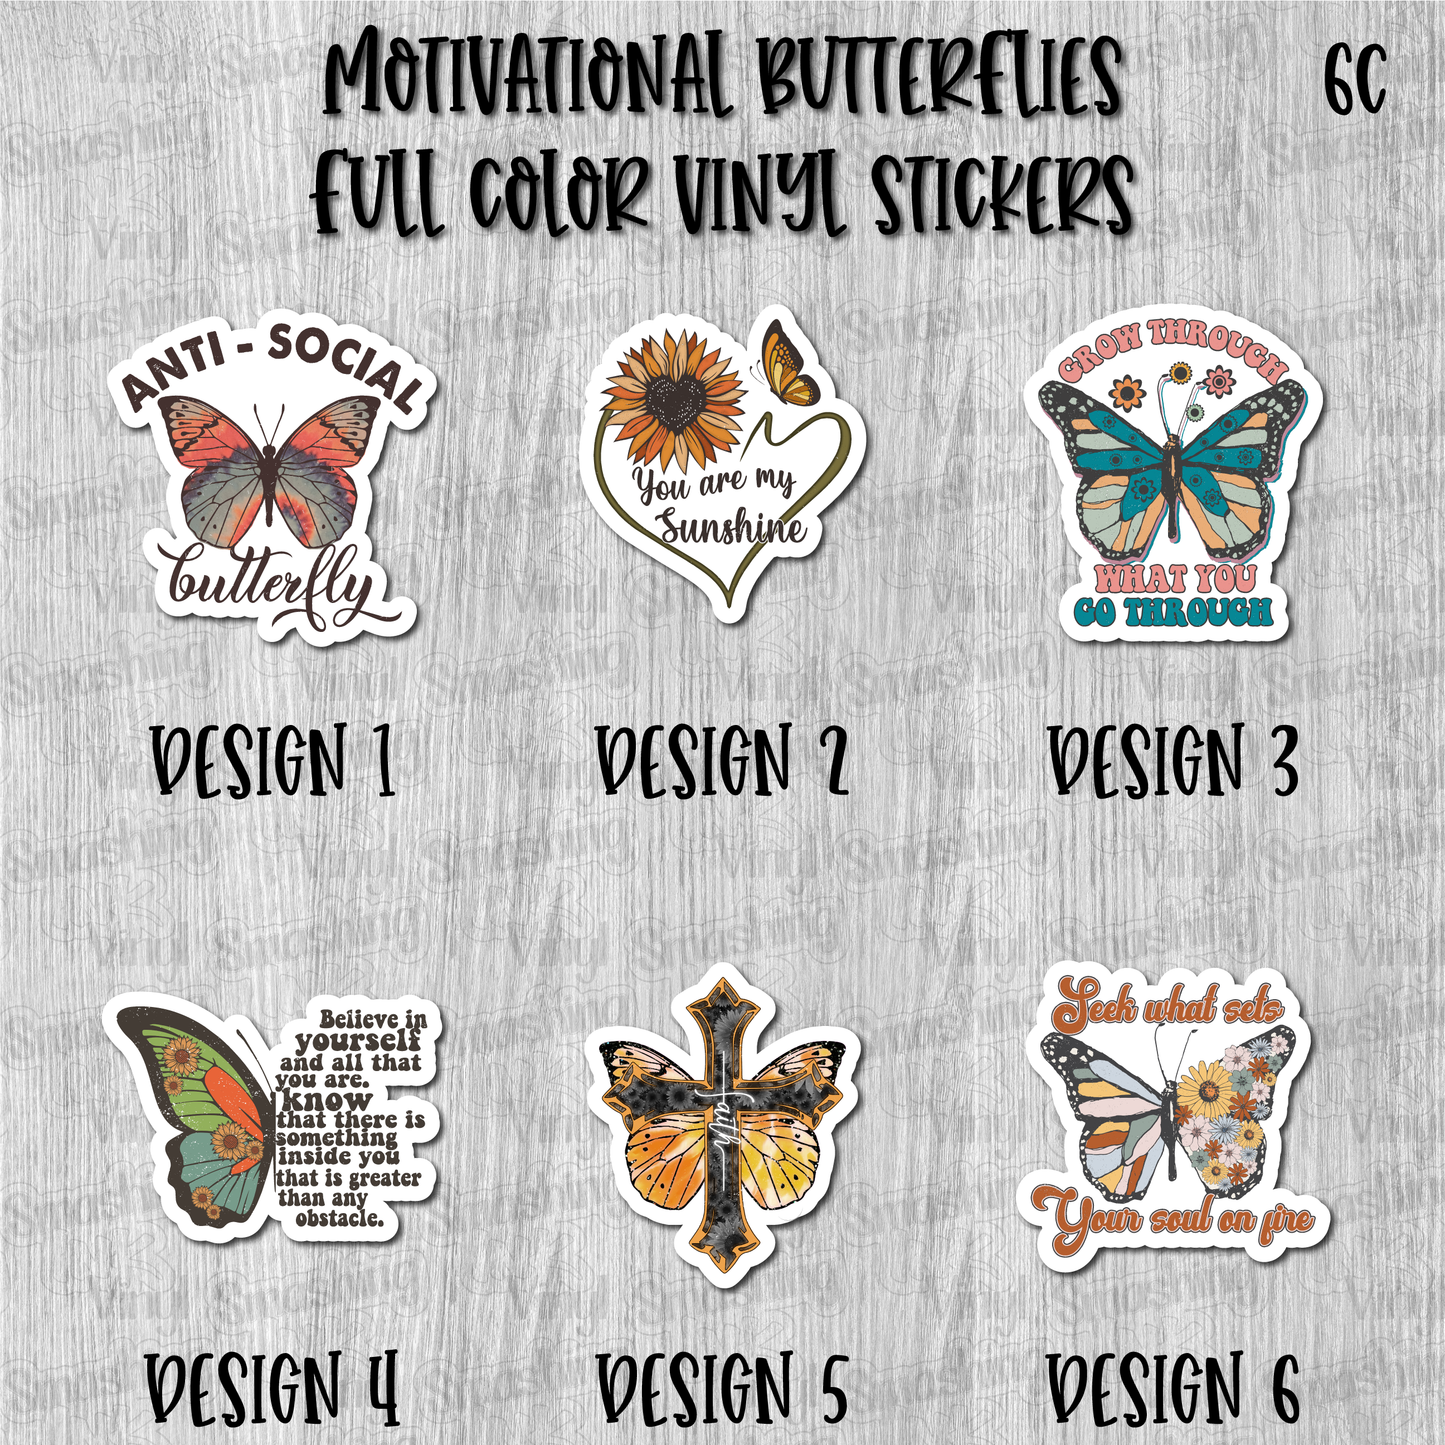 Motivational Butterflies - Full Color Vinyl Stickers (SHIPS IN 3-7 BUS DAYS)